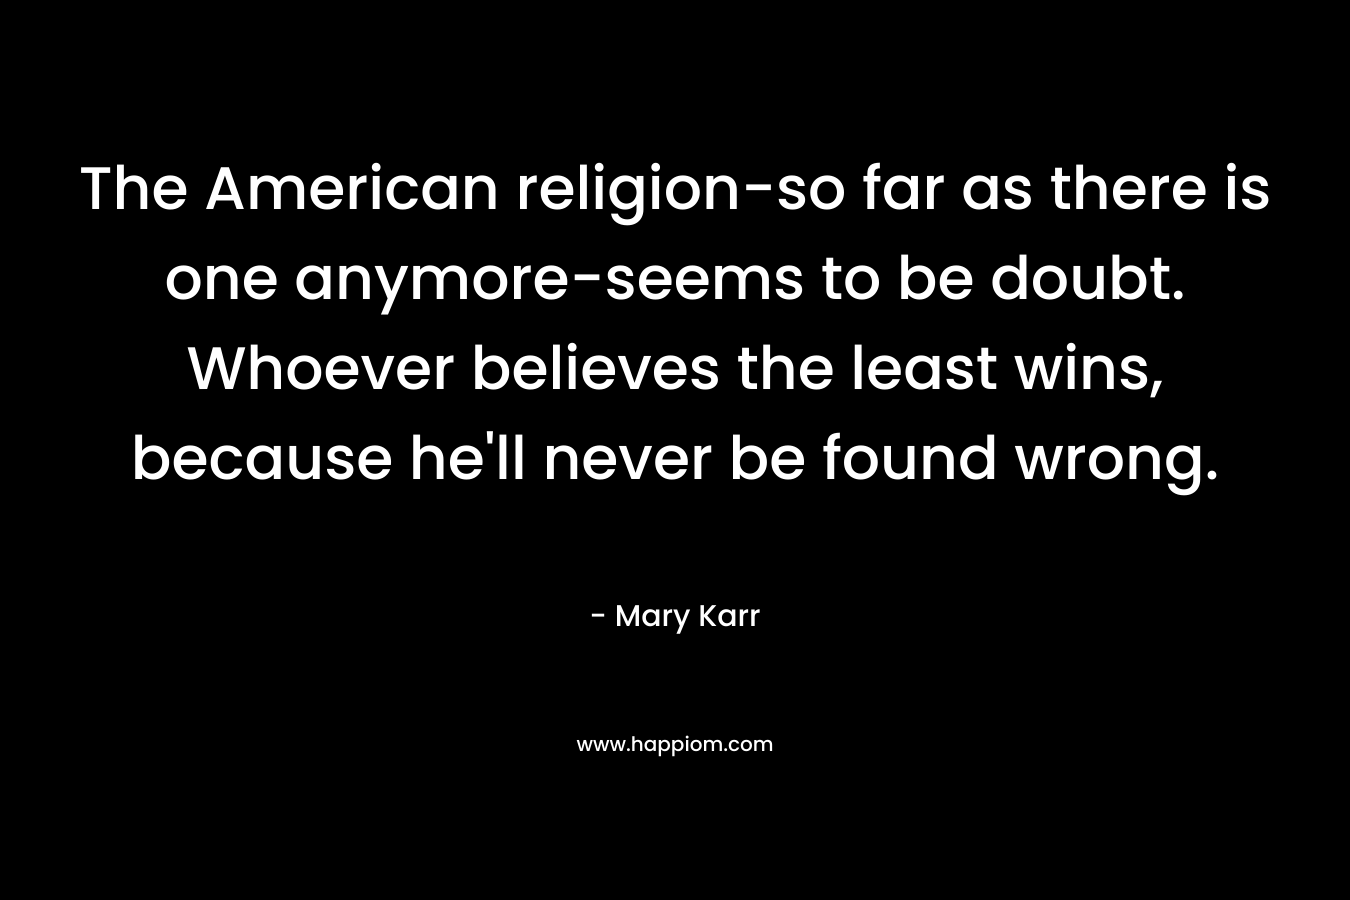 The American religion-so far as there is one anymore-seems to be doubt. Whoever believes the least wins, because he’ll never be found wrong. – Mary Karr